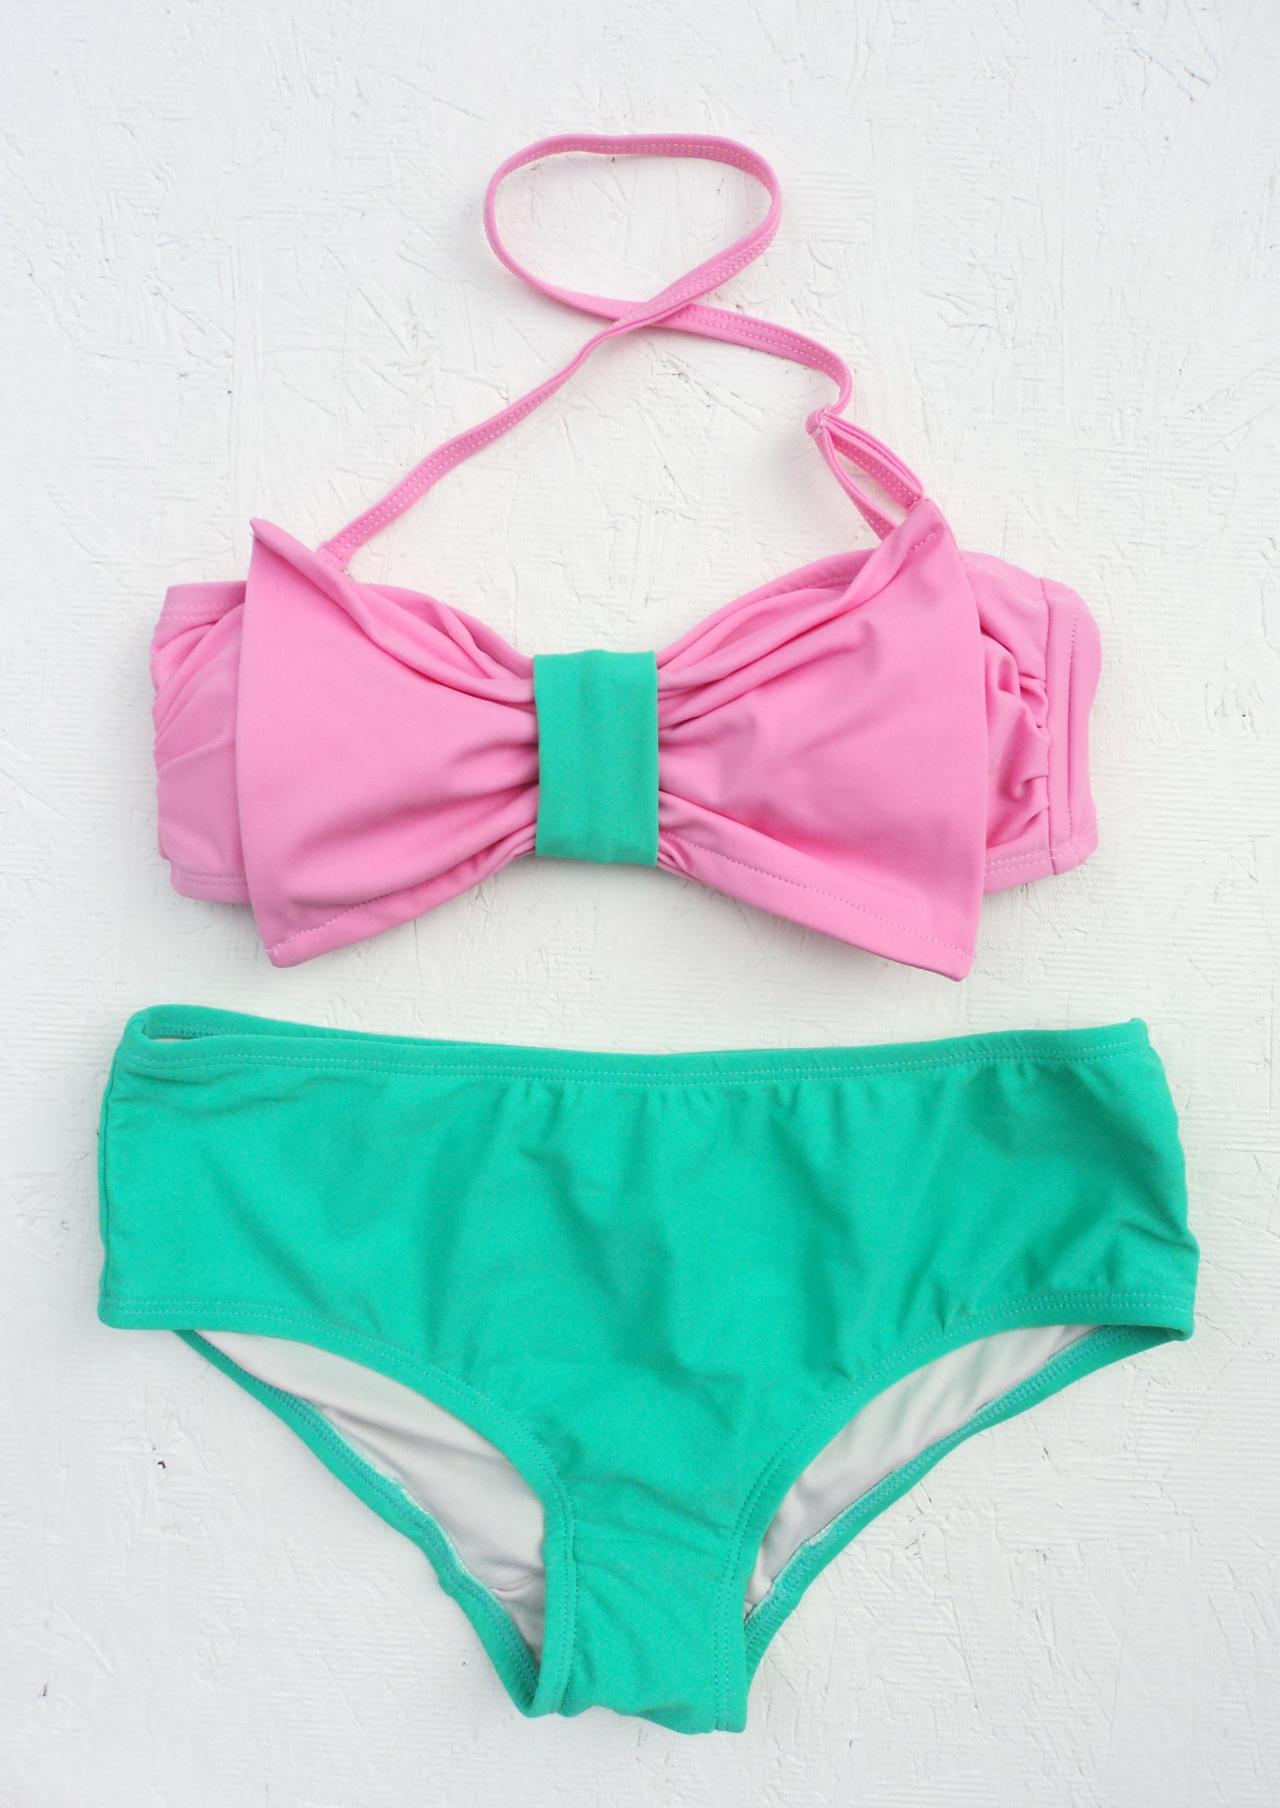 !! Beautiful, Fun & Pretty Two Pieces // Contrasted Colour // Bow Top With Medium Waist Bottom